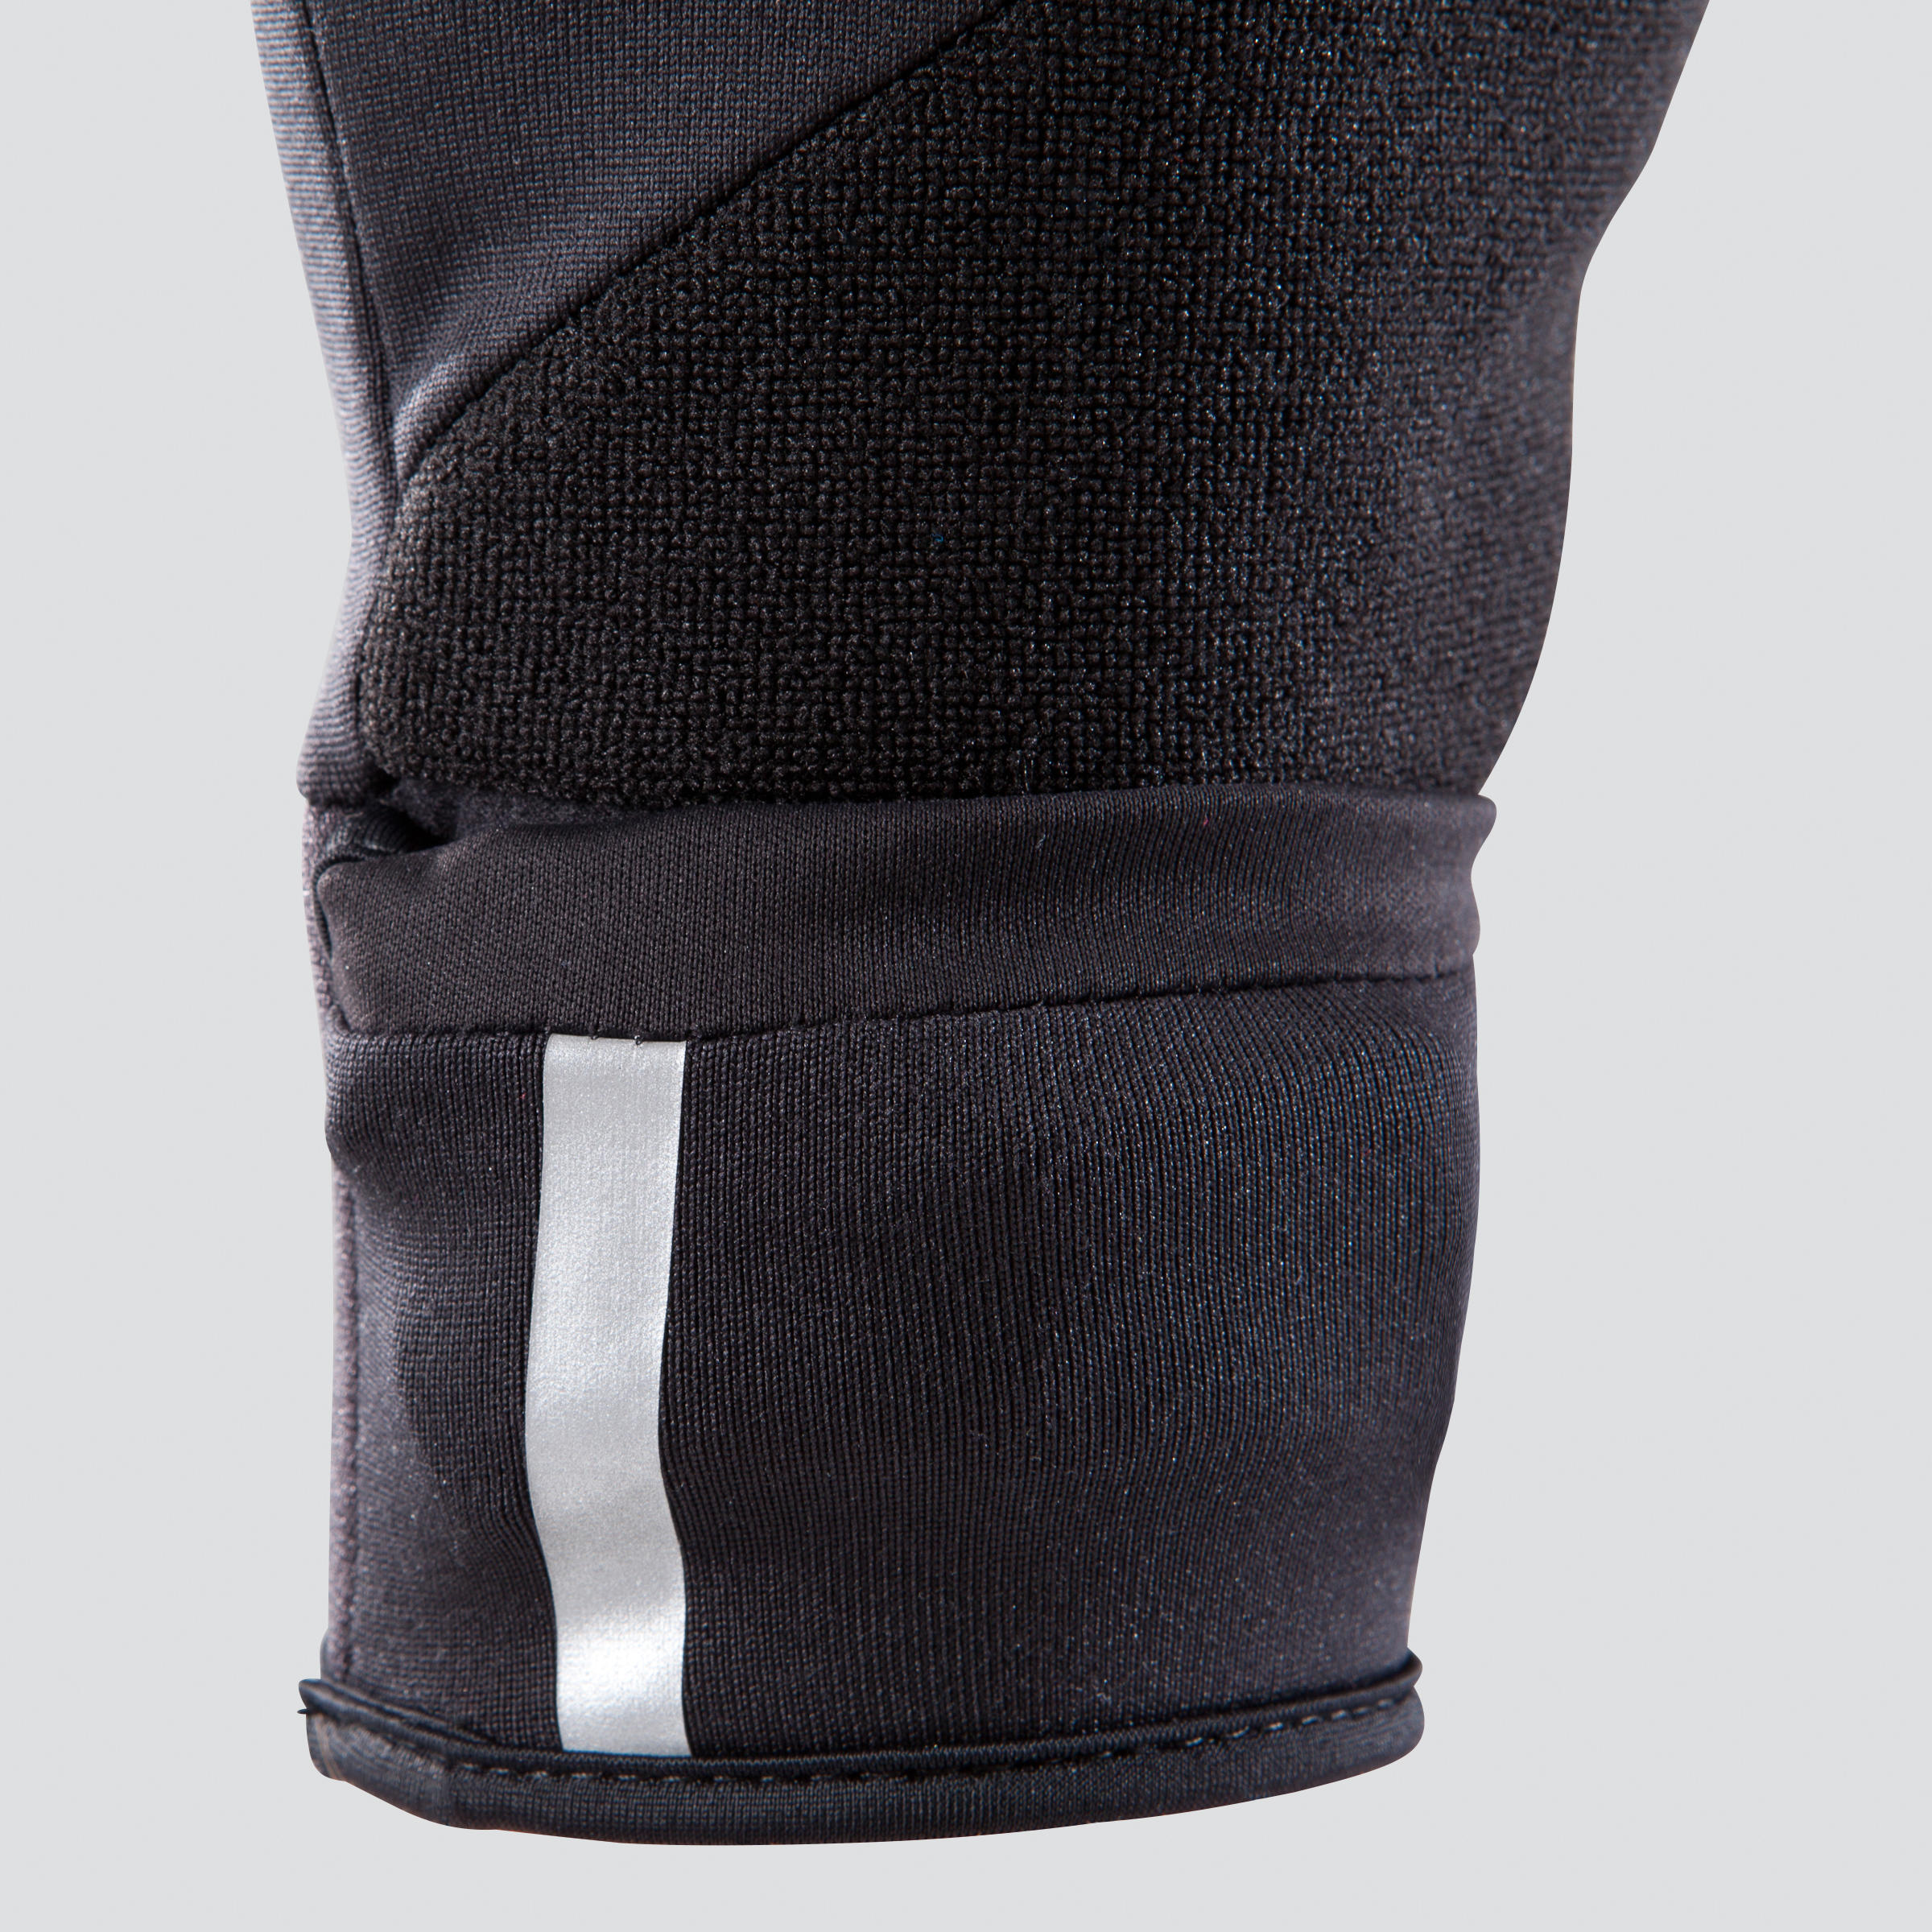 EVOLUTIV BY NIGHT GLOVES BLACK additional mittent cover 7/12